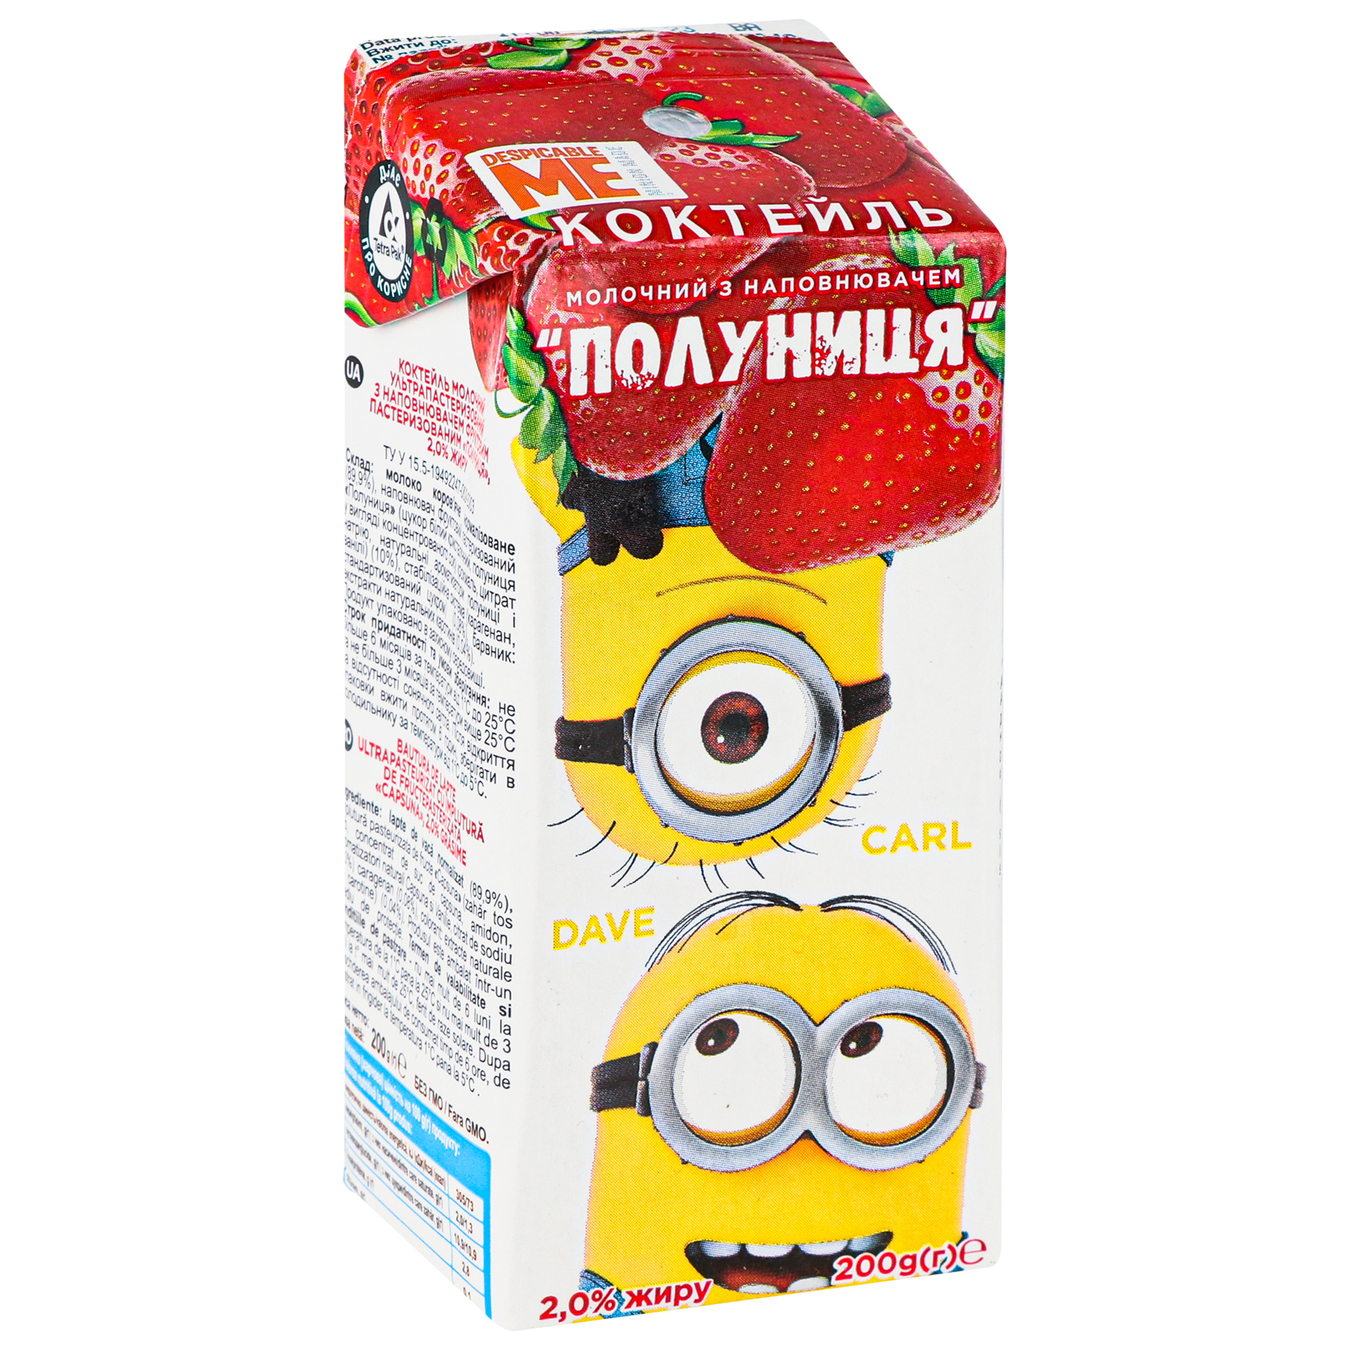 Despicable Me Milk Cocktail with Strawberry Filling 2% 200g 8